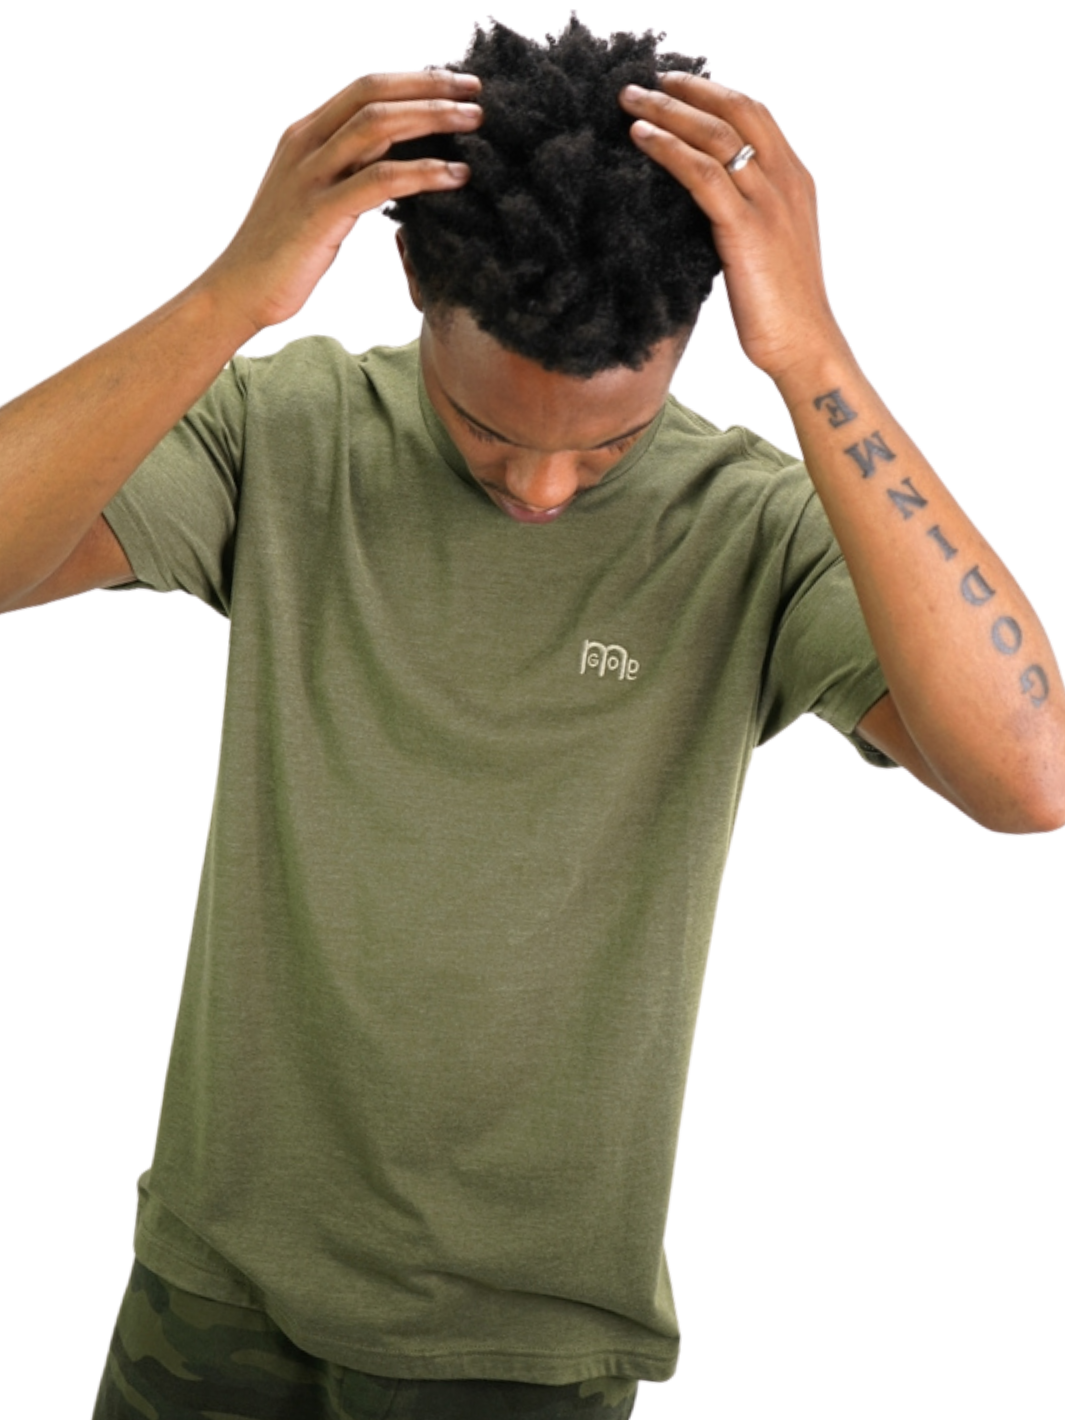 Lightweight softness for all-day comfort and the powerful GODinme logo to represent GOD's Greatness in you; this Olive Green GODinme T-Shirt is made for you: GOD in you.